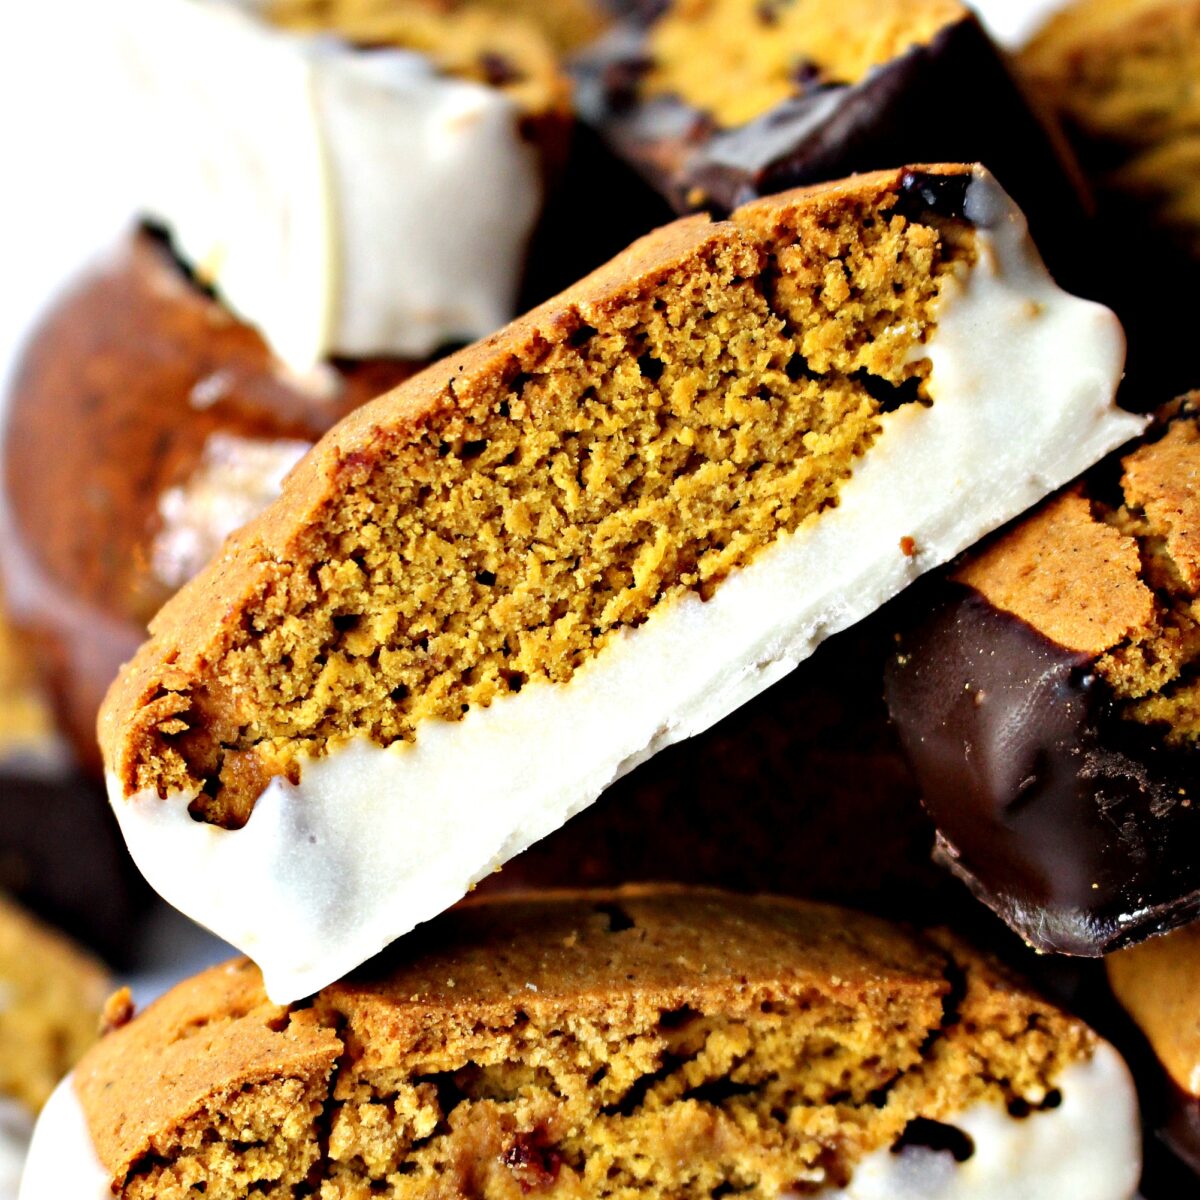 Close up of a biscotti showing the dense, crisp and white chocolate dipped bottom.